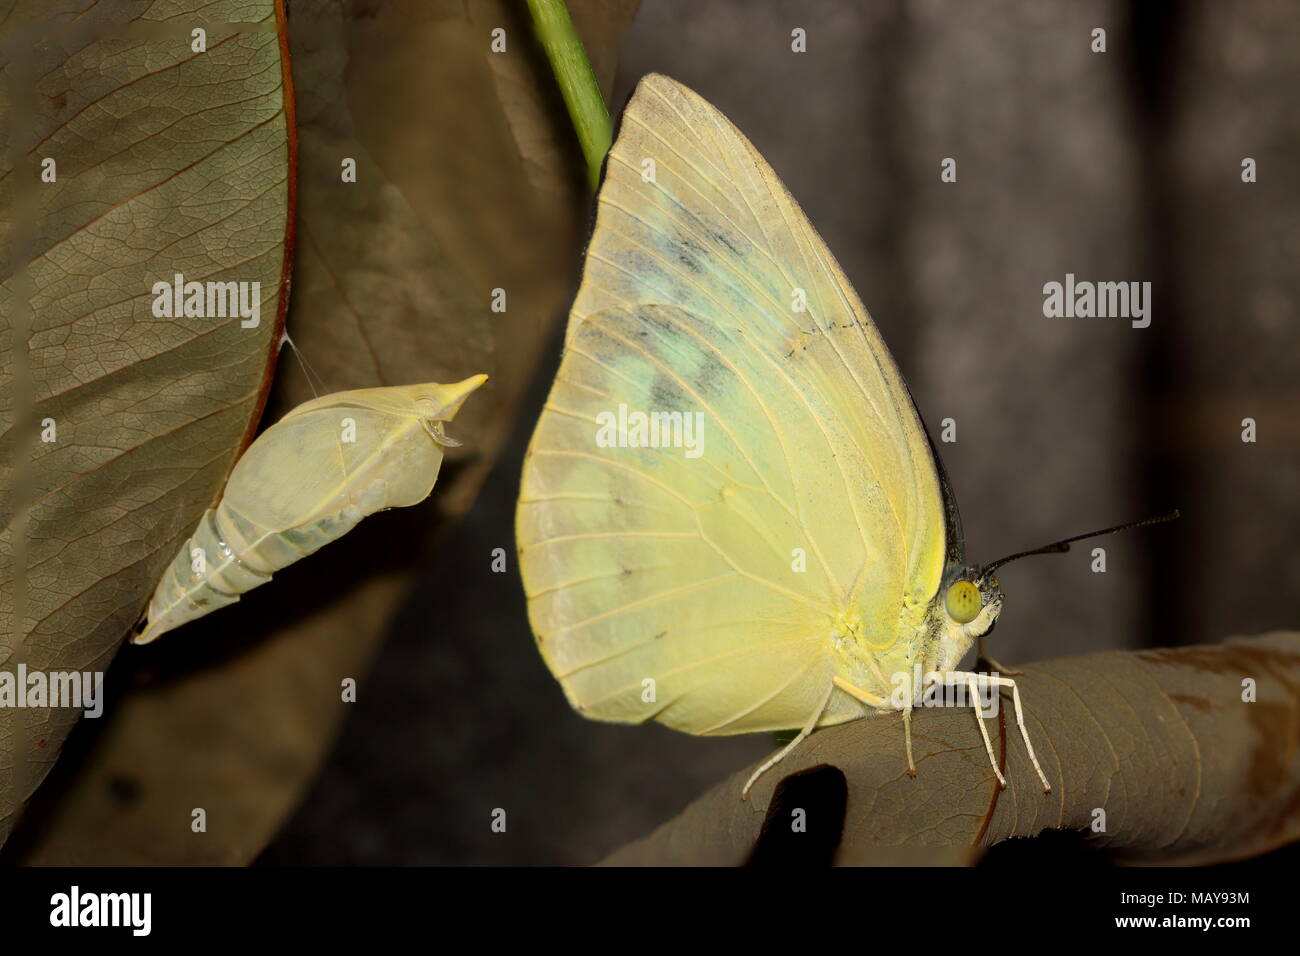 A Common Emigrant or Lemon Emigrant butterfly, Catopsilia pomona, after eclosion, with the pupal case in which it emerged in the background. Stock Photo